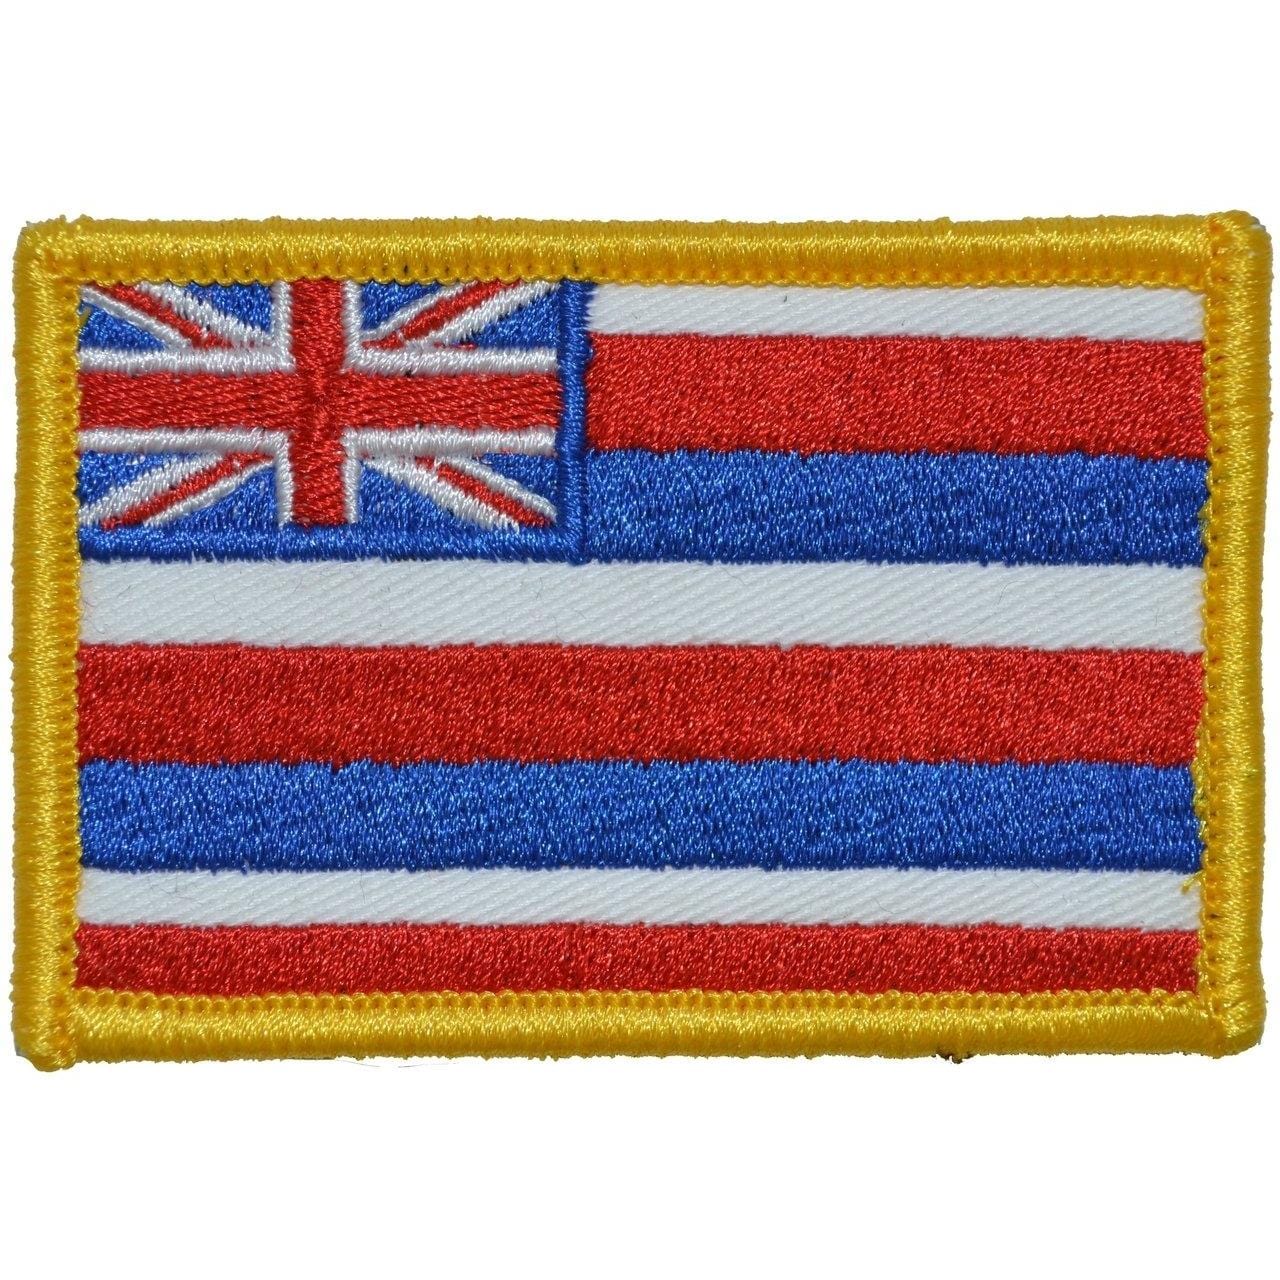 Tactical Gear Junkie Patches Full Color Hawaii State Flag - 2x3 Patch